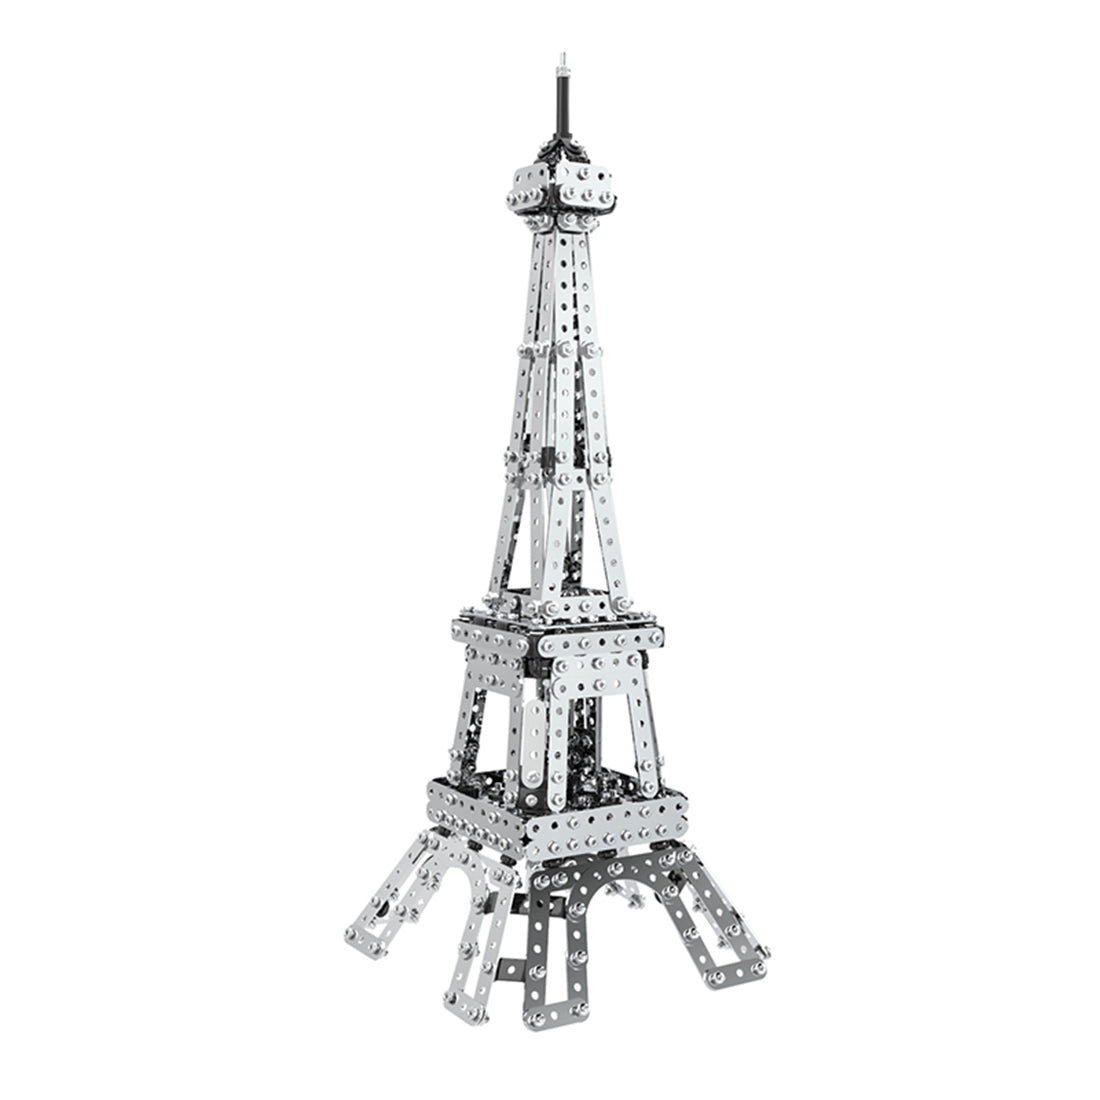 791Pcs Stainless Steel Eiffel Tower DIY Assembly Building Block Educational Toys Kit with LED - English Version SW-019